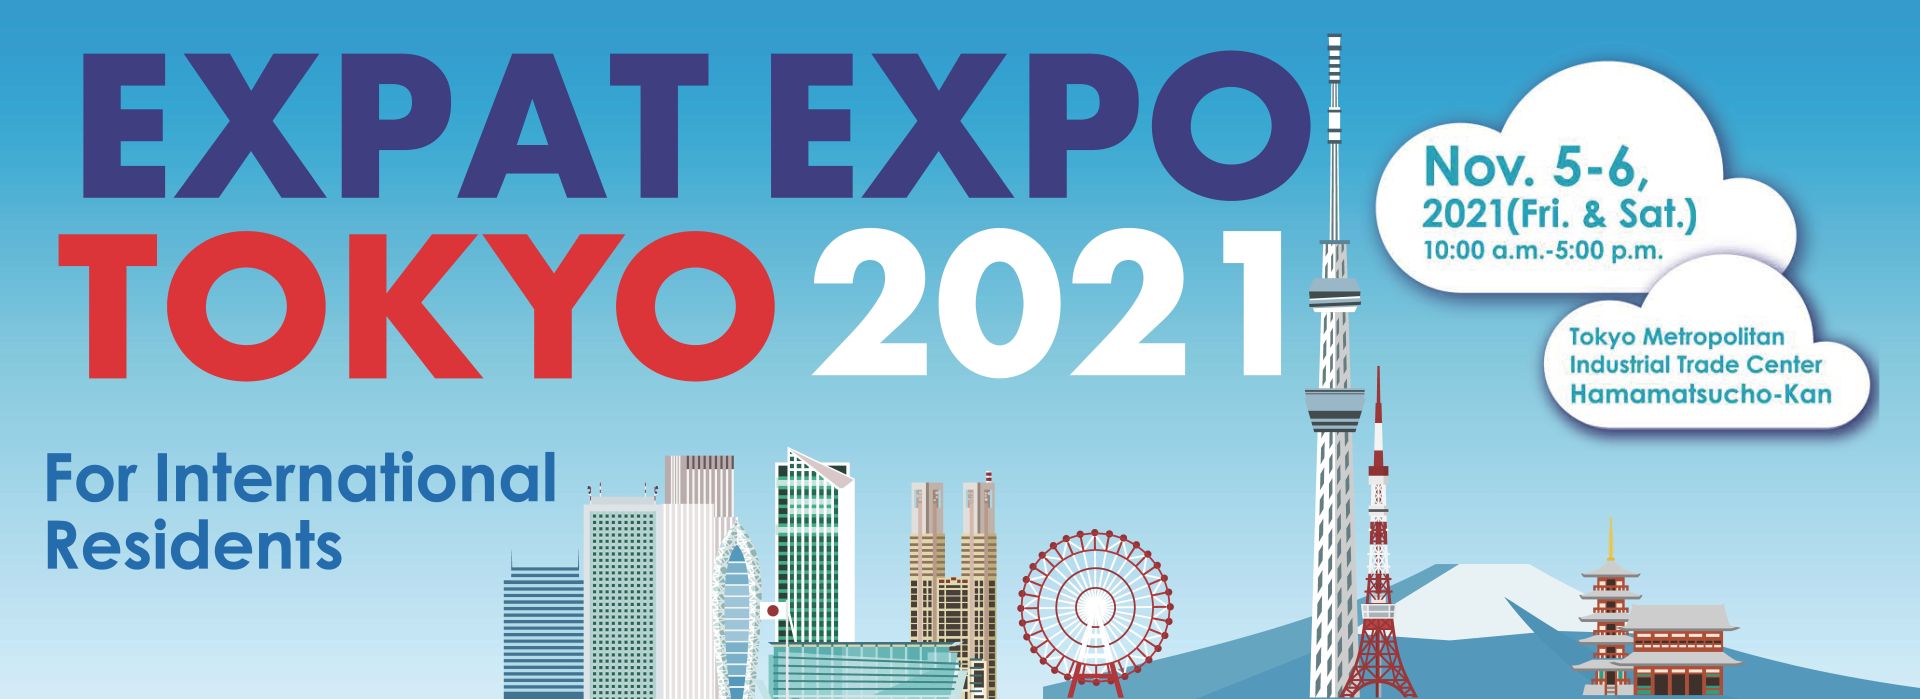 EXPAT_EXPO_TOKYO2021_banner